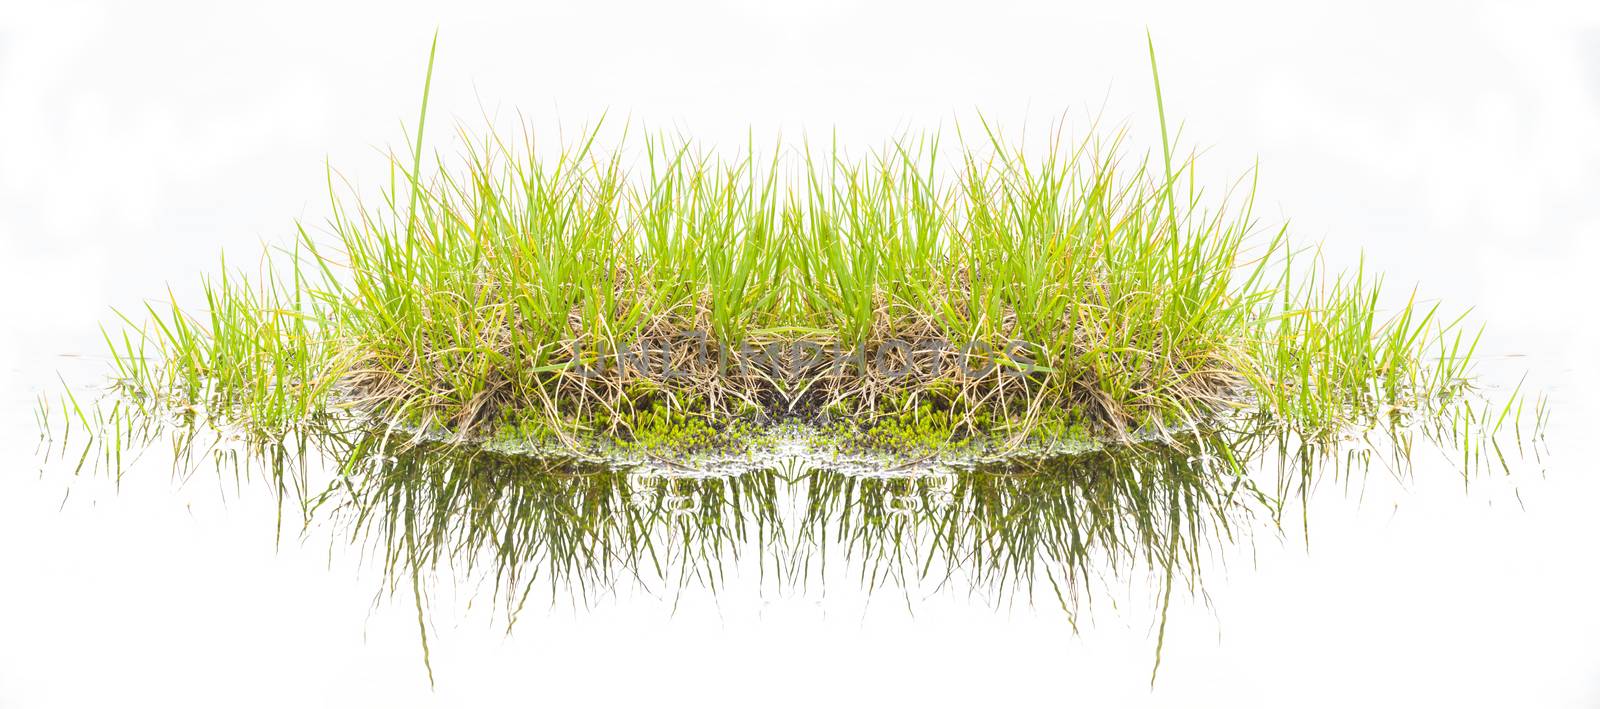 Water reflecting bush green grass on a white background